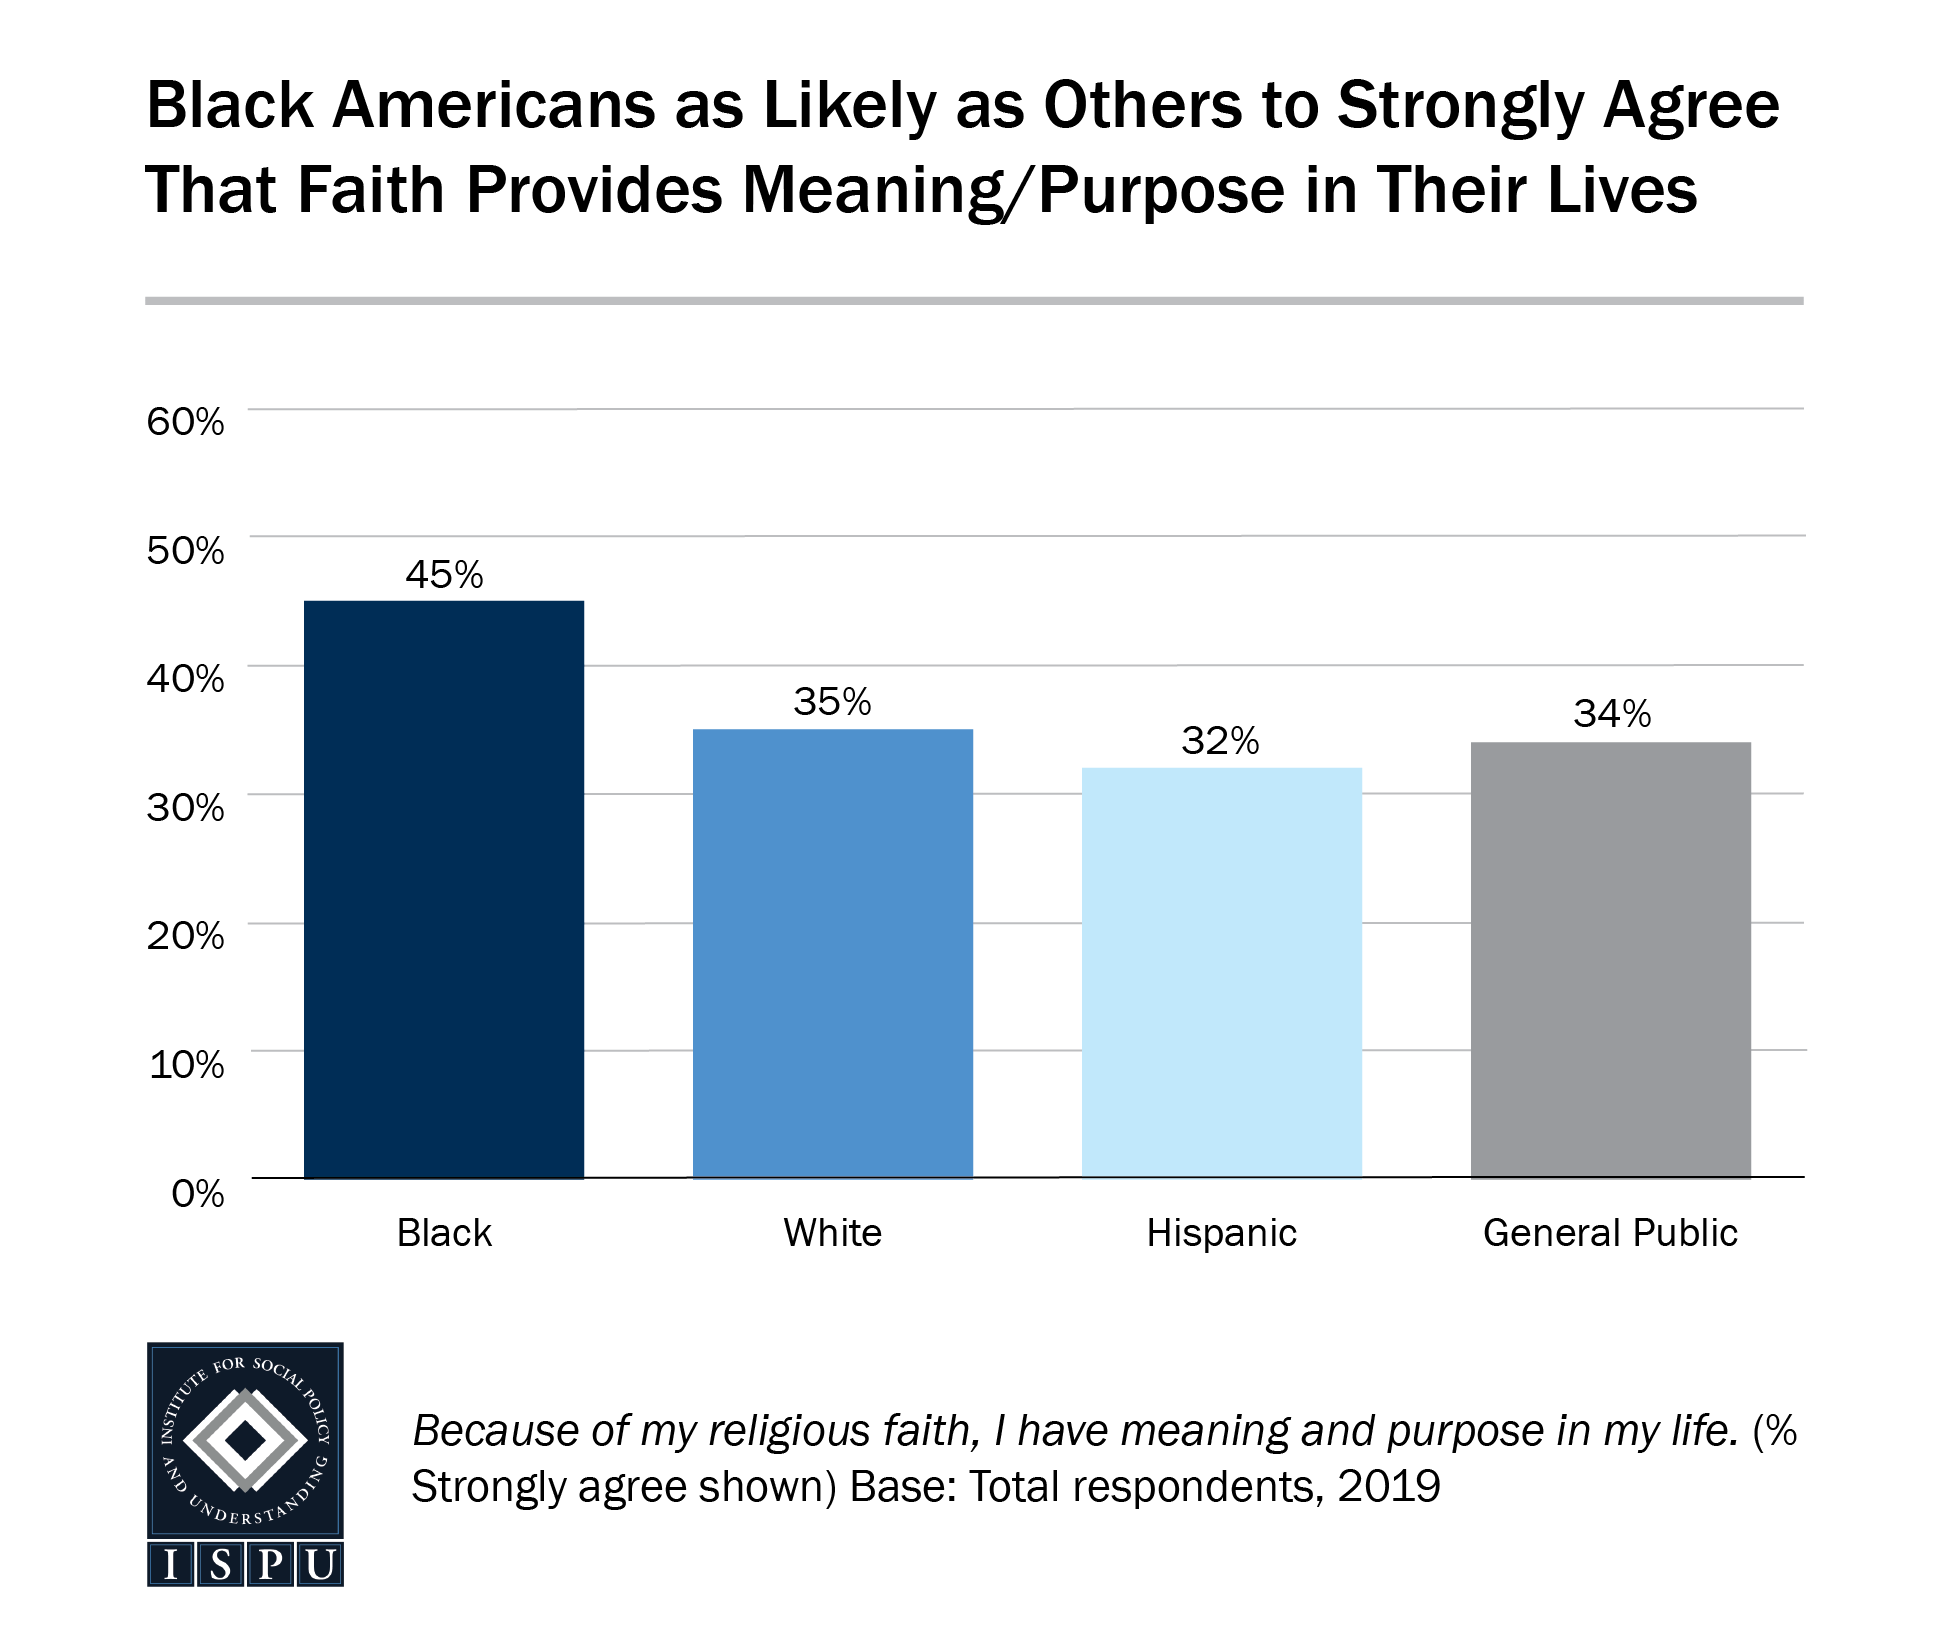 A bar graph showing that Black Americans are as likely as others to strongly agree that faith provides meaning/purpose in their lives